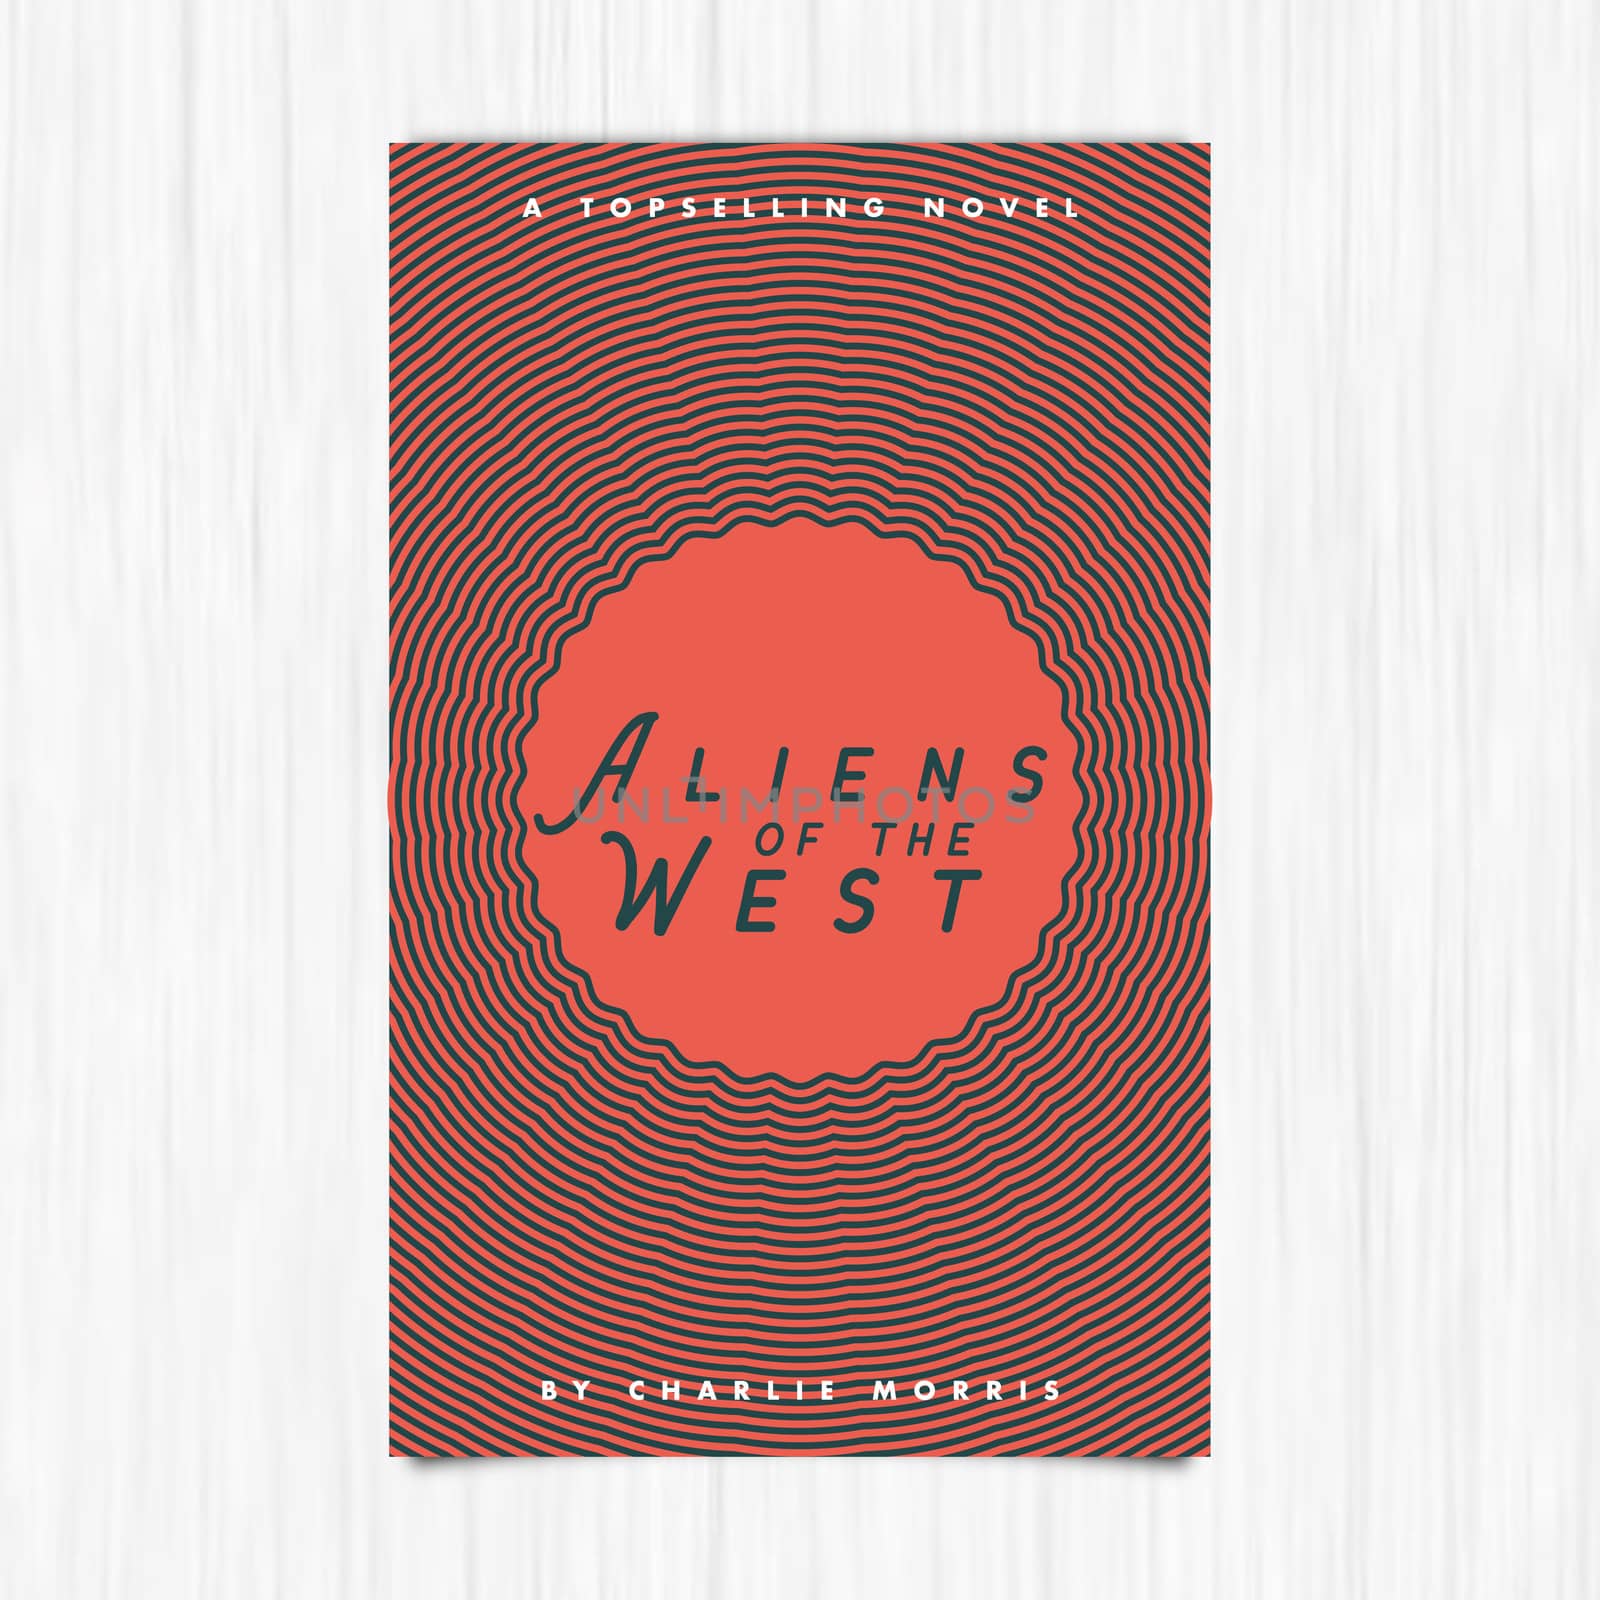 Vector of novel cover with aliens of the west text against white background